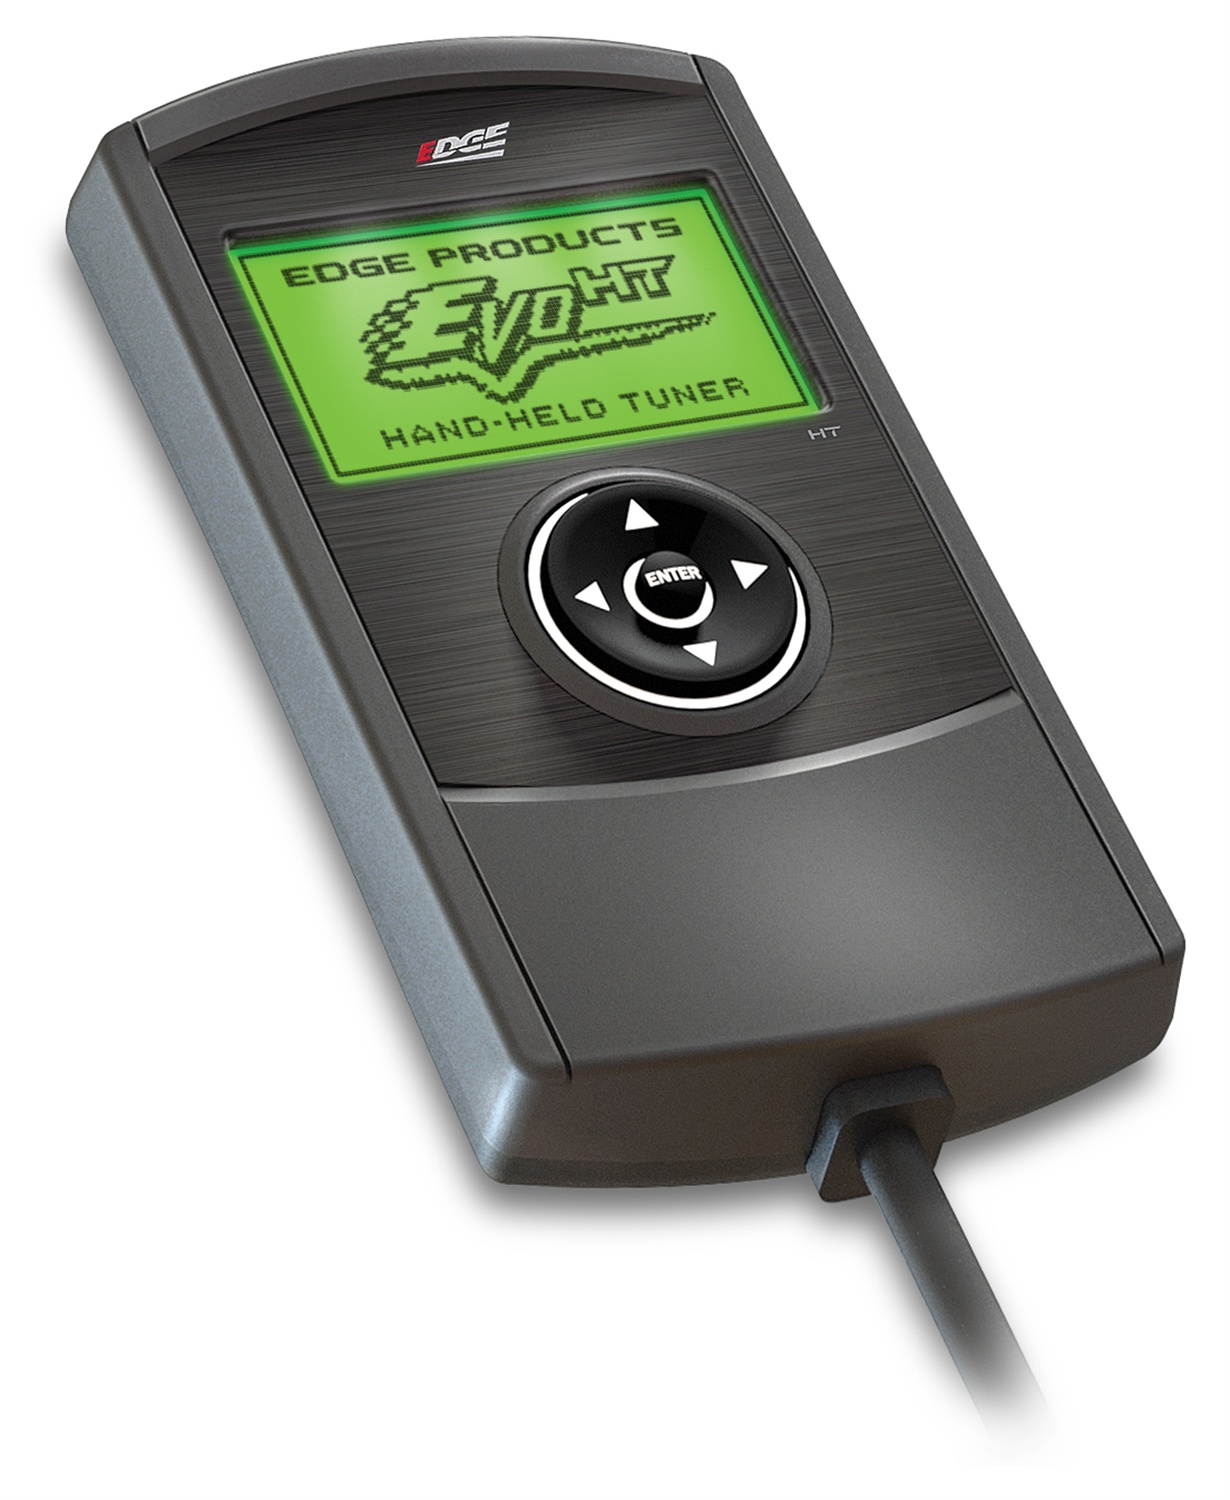 Edge Products Edge Products 36030 EvoHT Programmer